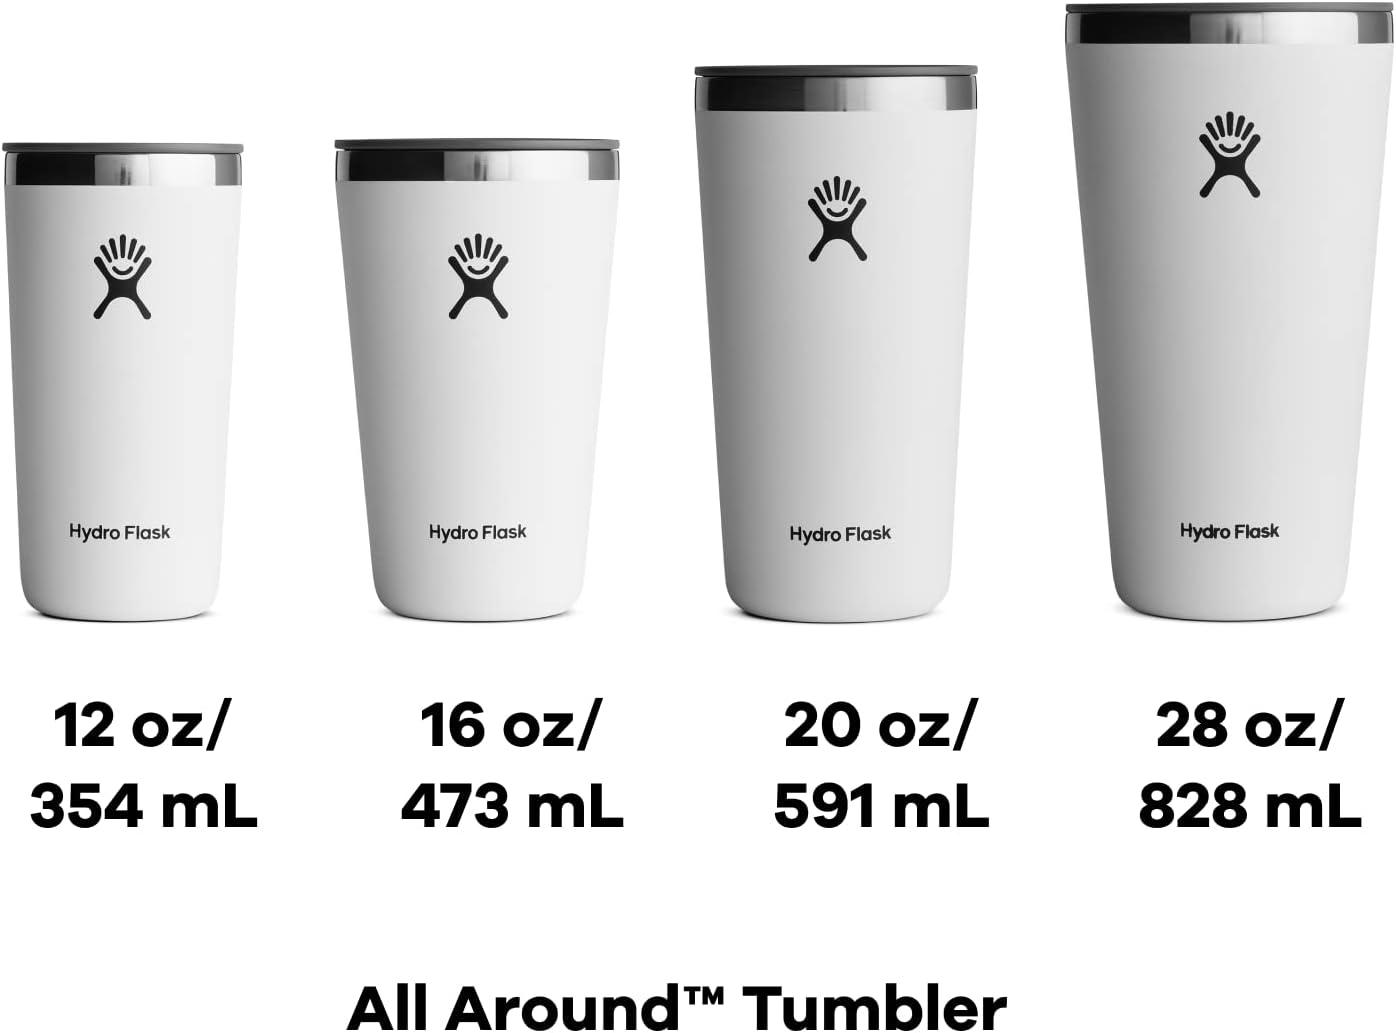 Hydro Flask All Around Tumbler - Stainless Steel Reusable